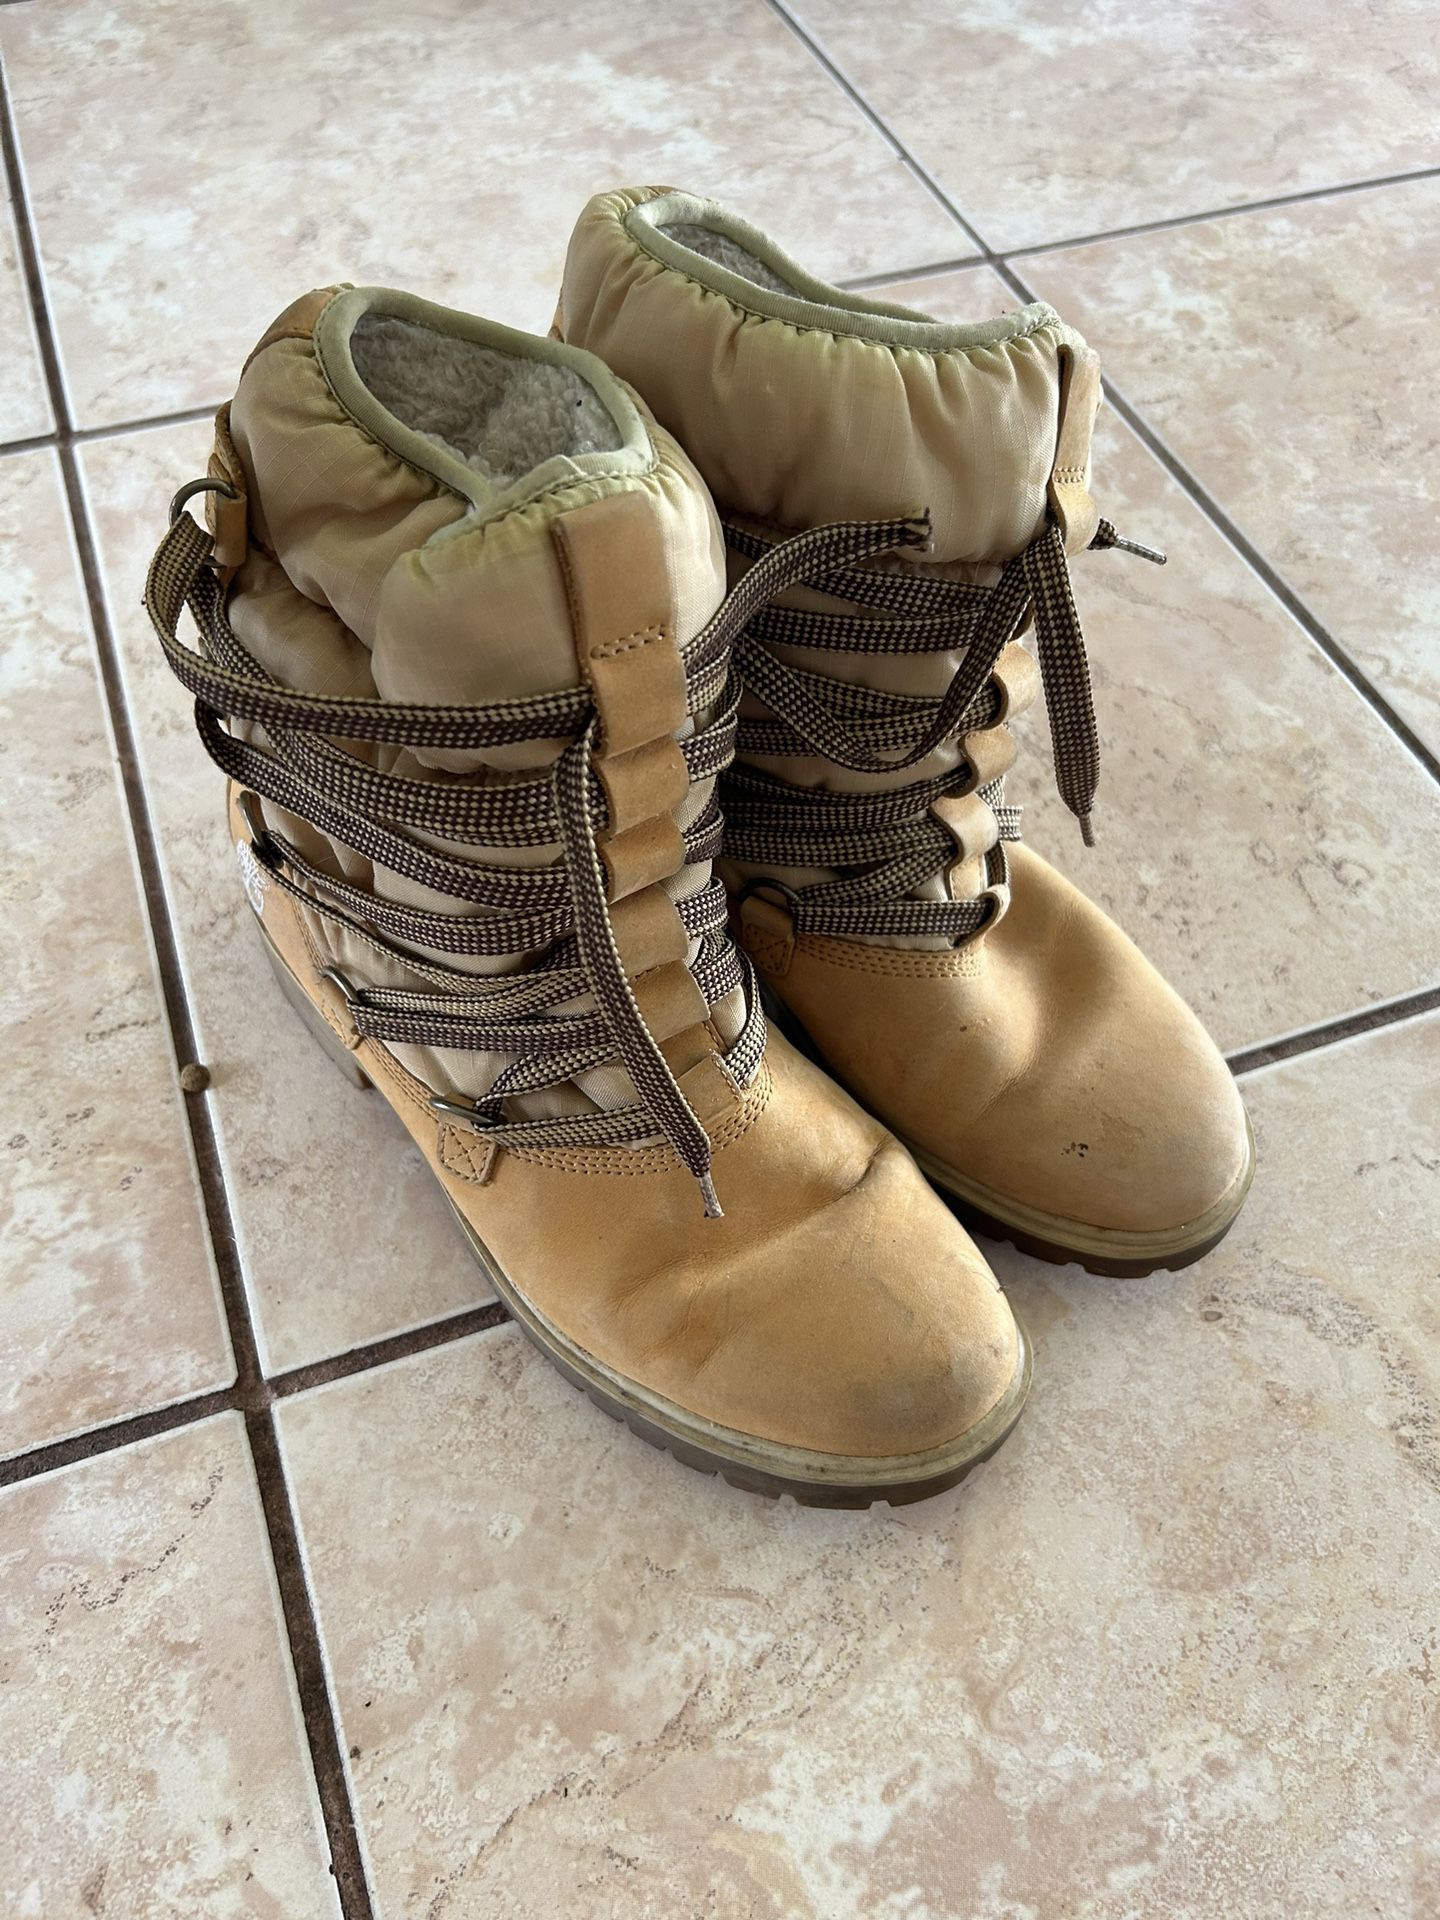 Timberland Wool Tan Snow Boots, Size 8 1/2